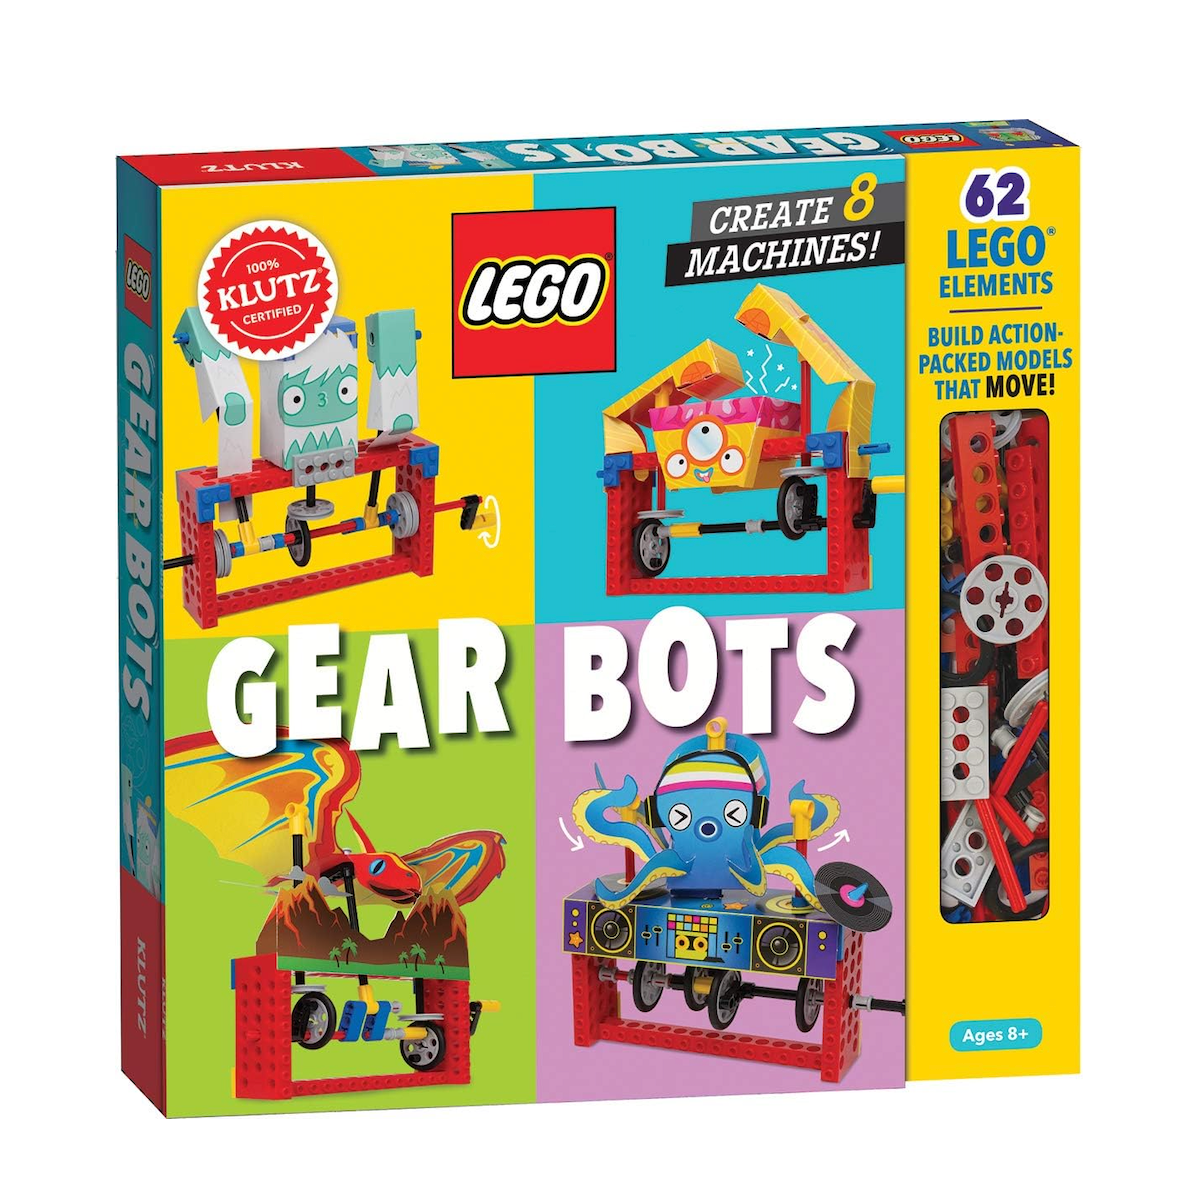 s 2023 Toys We Love List: Shop the Hottest Toys for the Holidays